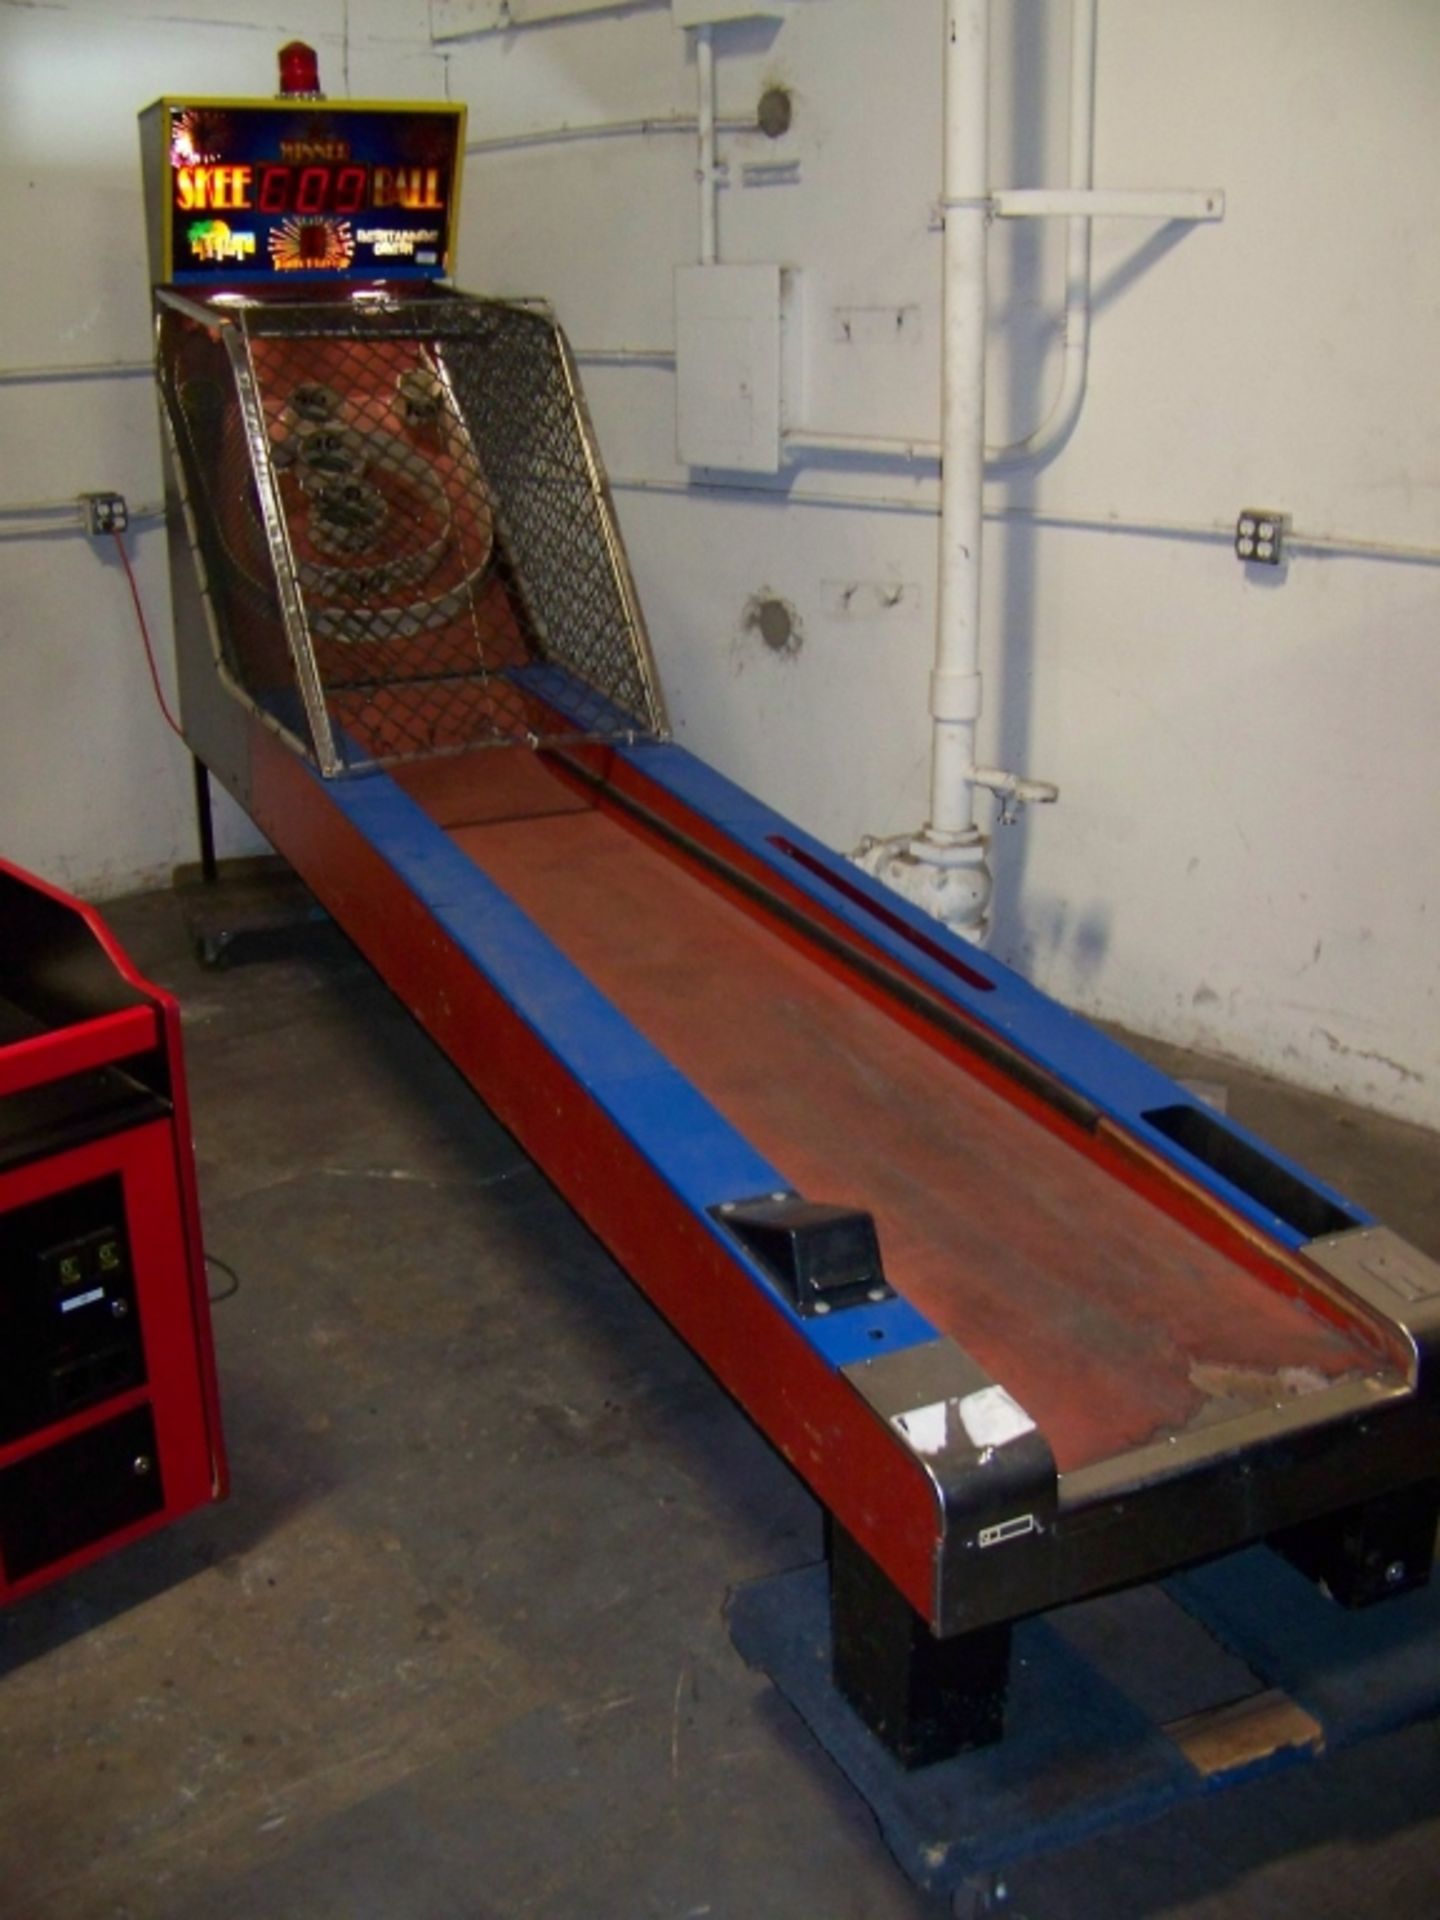 SKEEBALL ALLEY ROLLER MACHINE 13' LANE COMPLETE Item is in used condition. Evidence of wear and